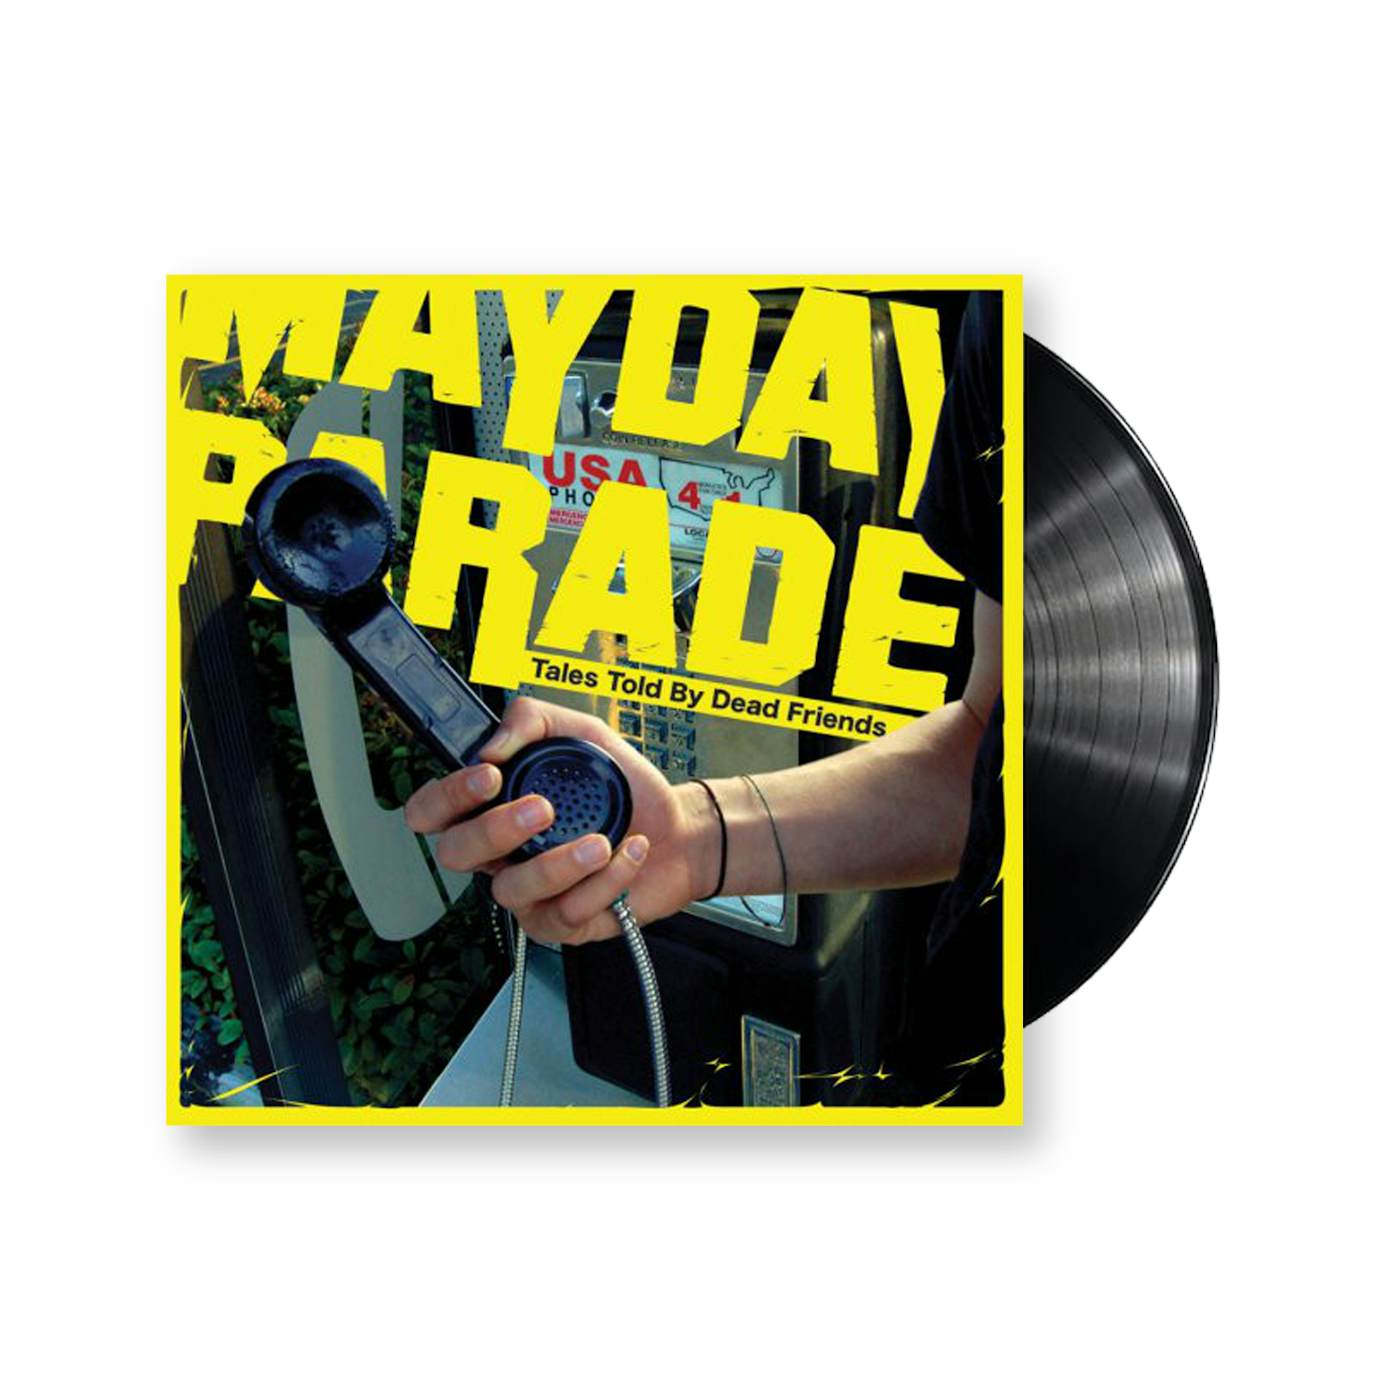 Mayday Parade Tales Told by Dead Friends 10" Vinyl